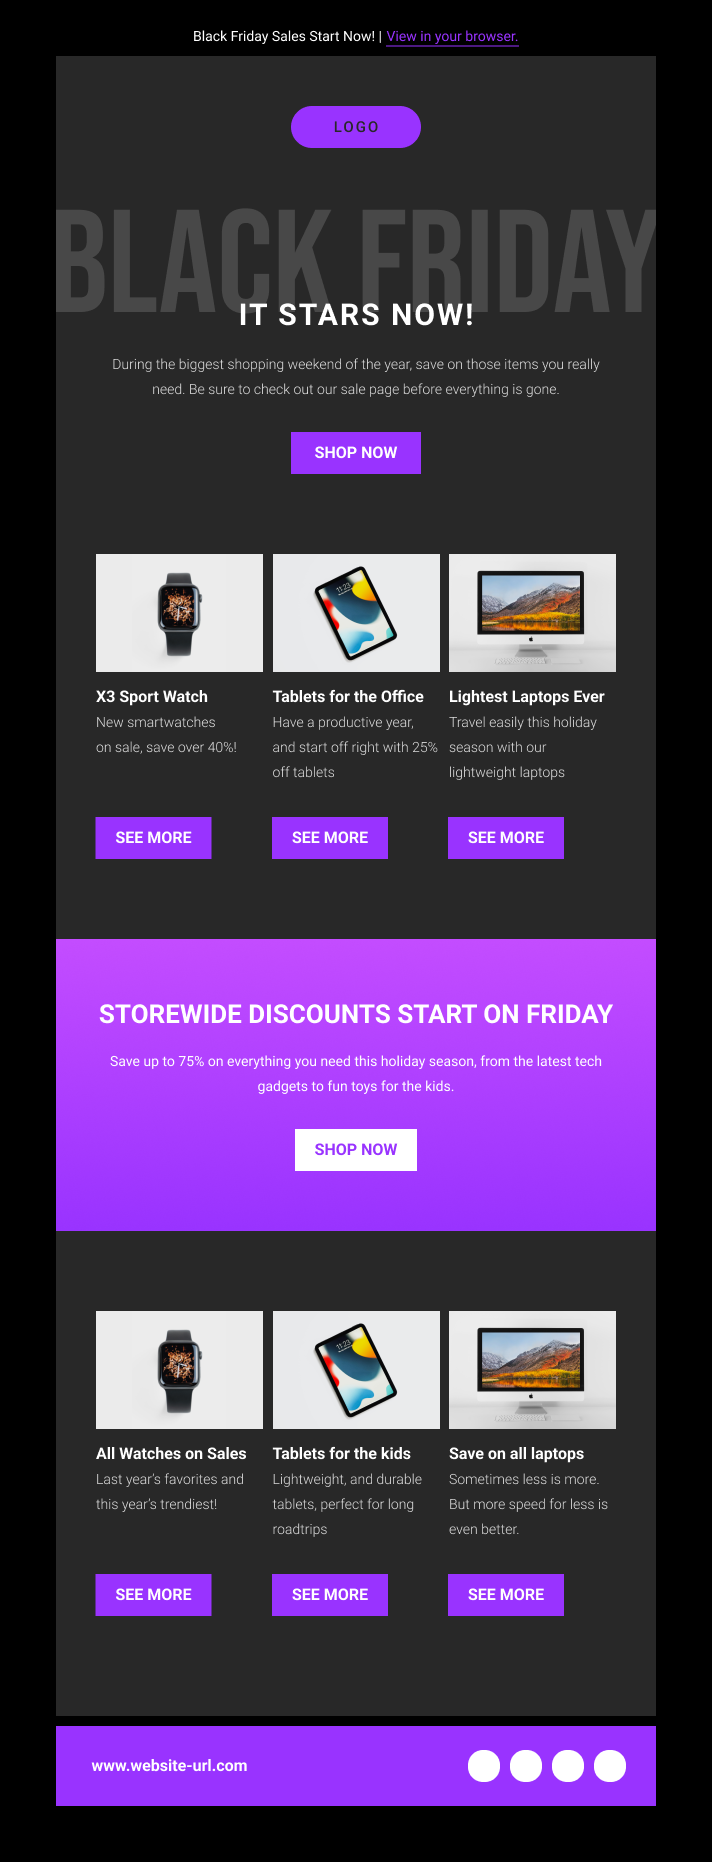 Black Friday email template by Mailjet